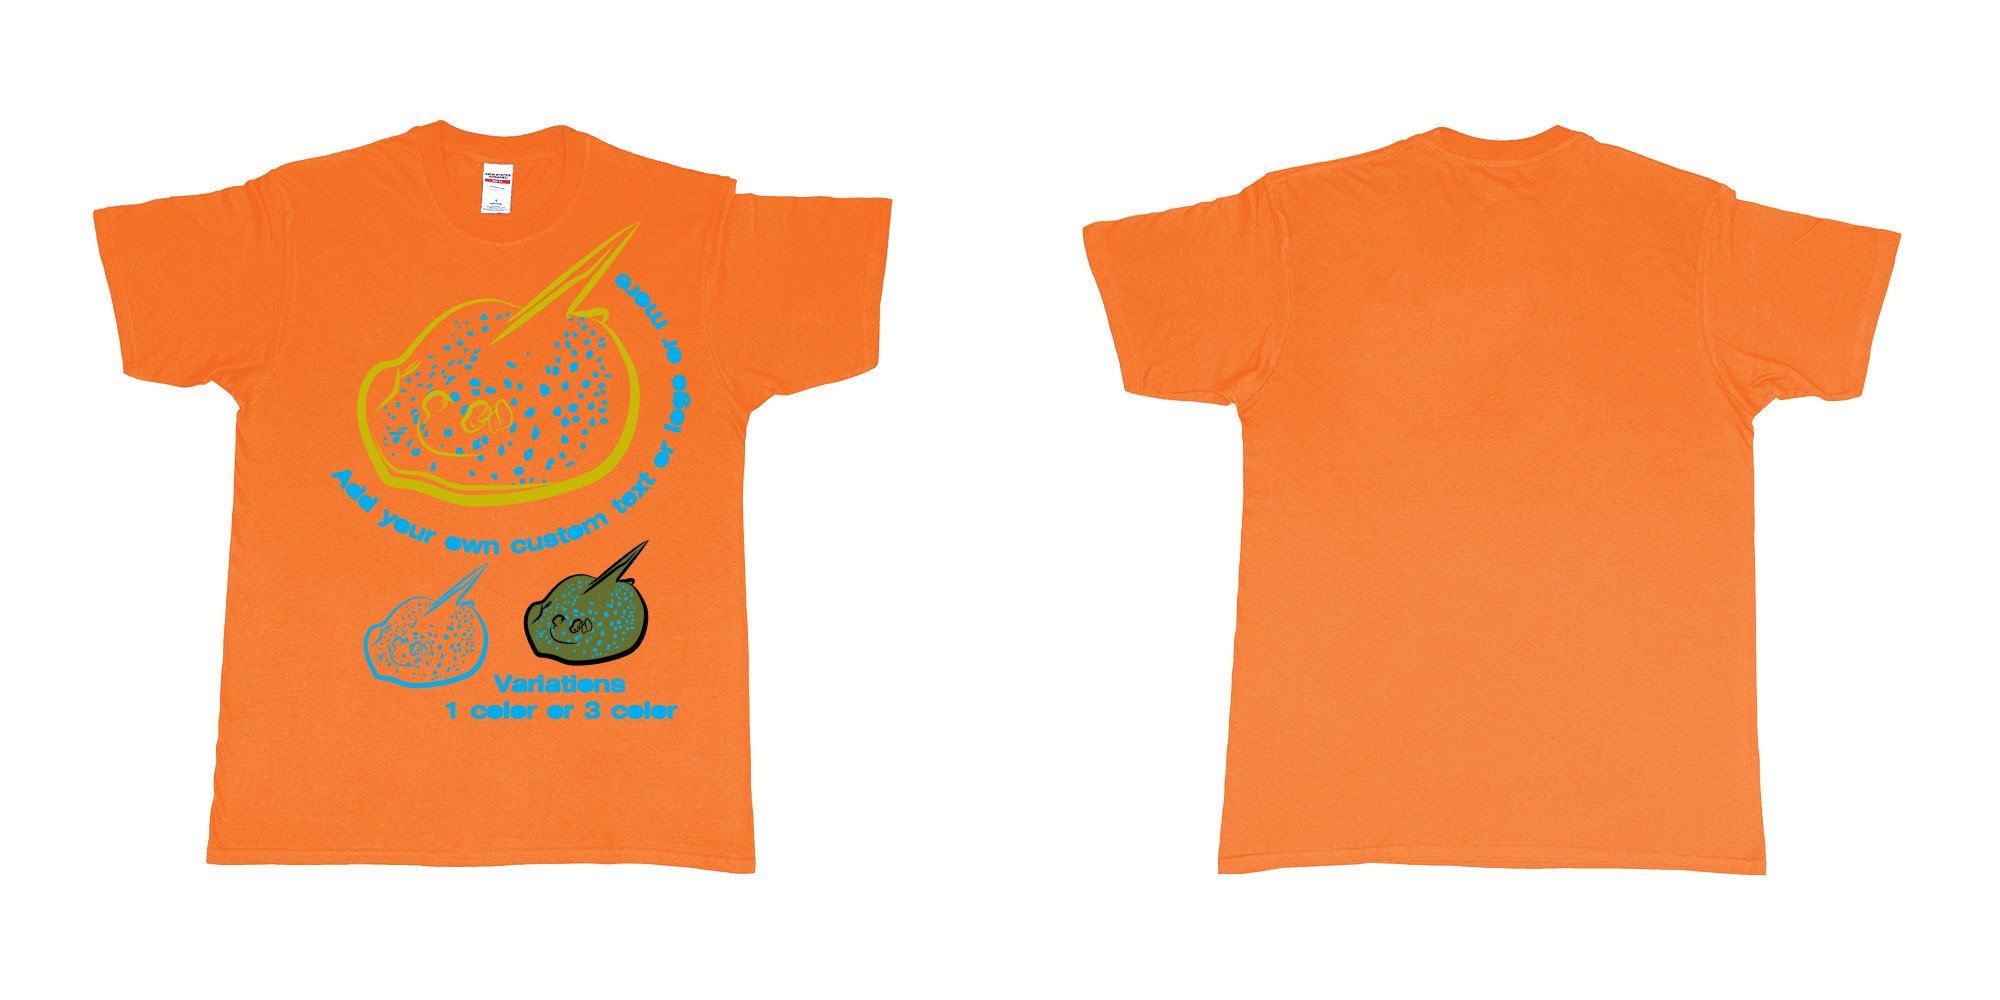 Custom tshirt design blue spotted stingray in fabric color orange choice your own text made in Bali by The Pirate Way